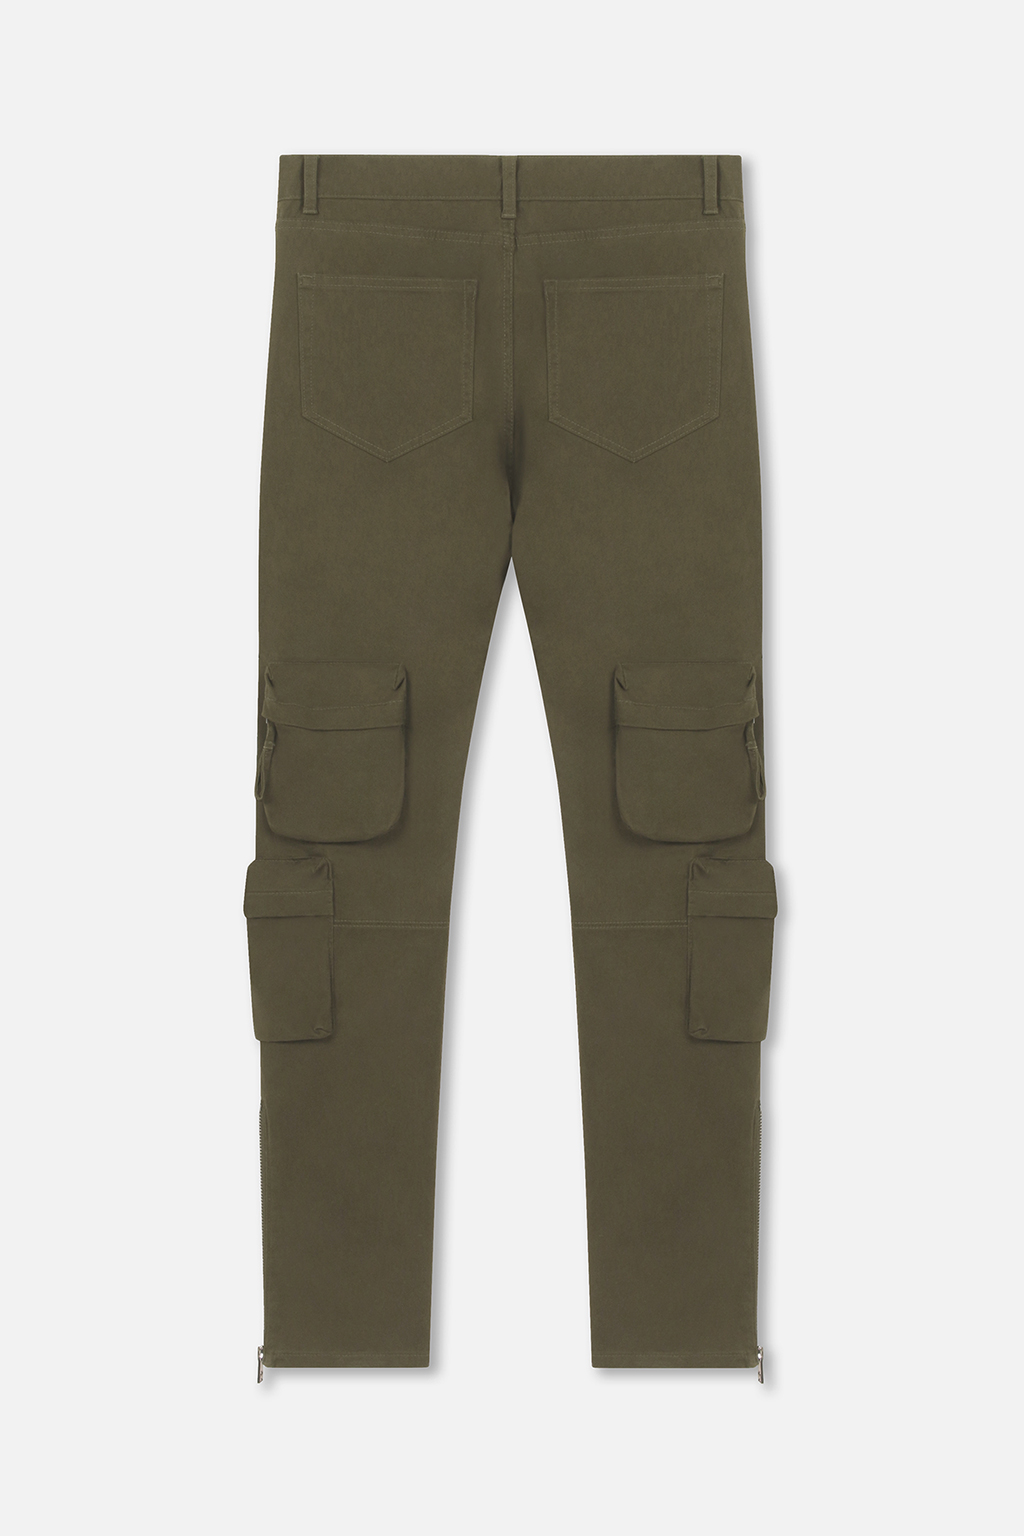 MLVINCE TYPE-2 SLIM CARGO PANTS-OLIVE 36